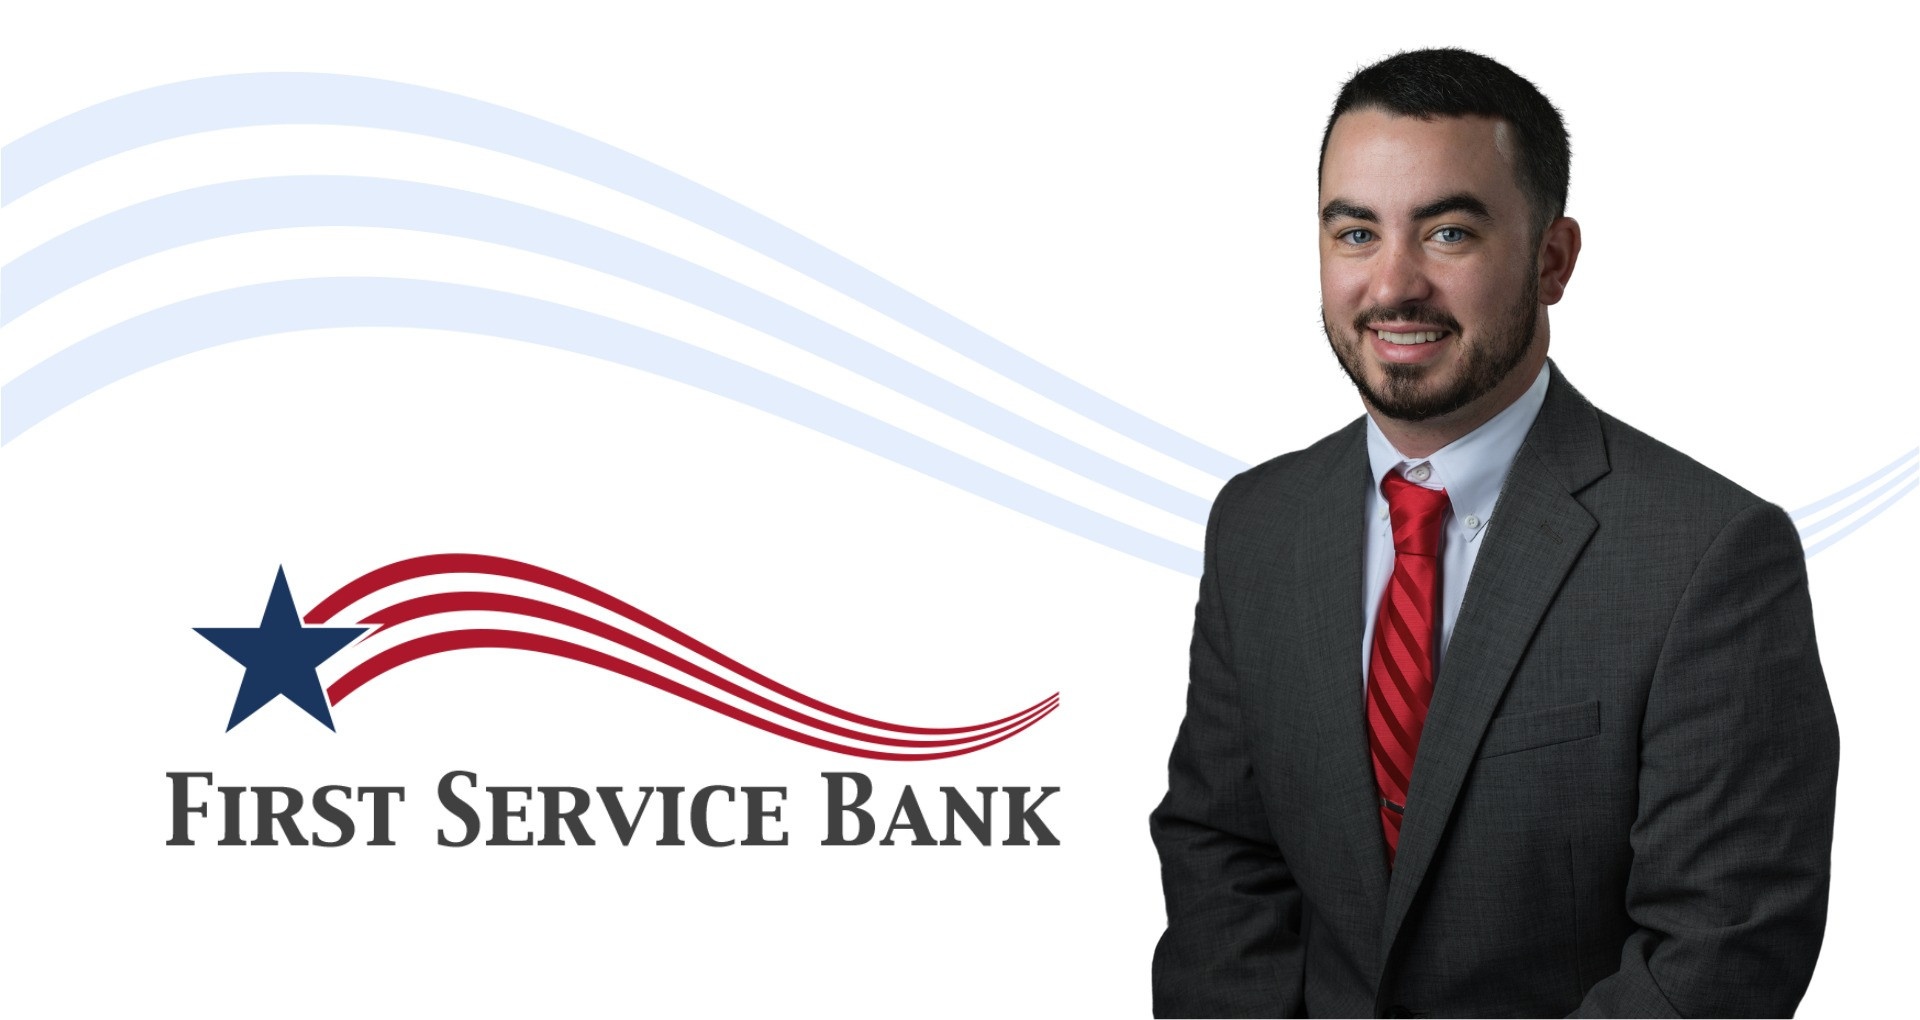 Salmon joins First Service Bank